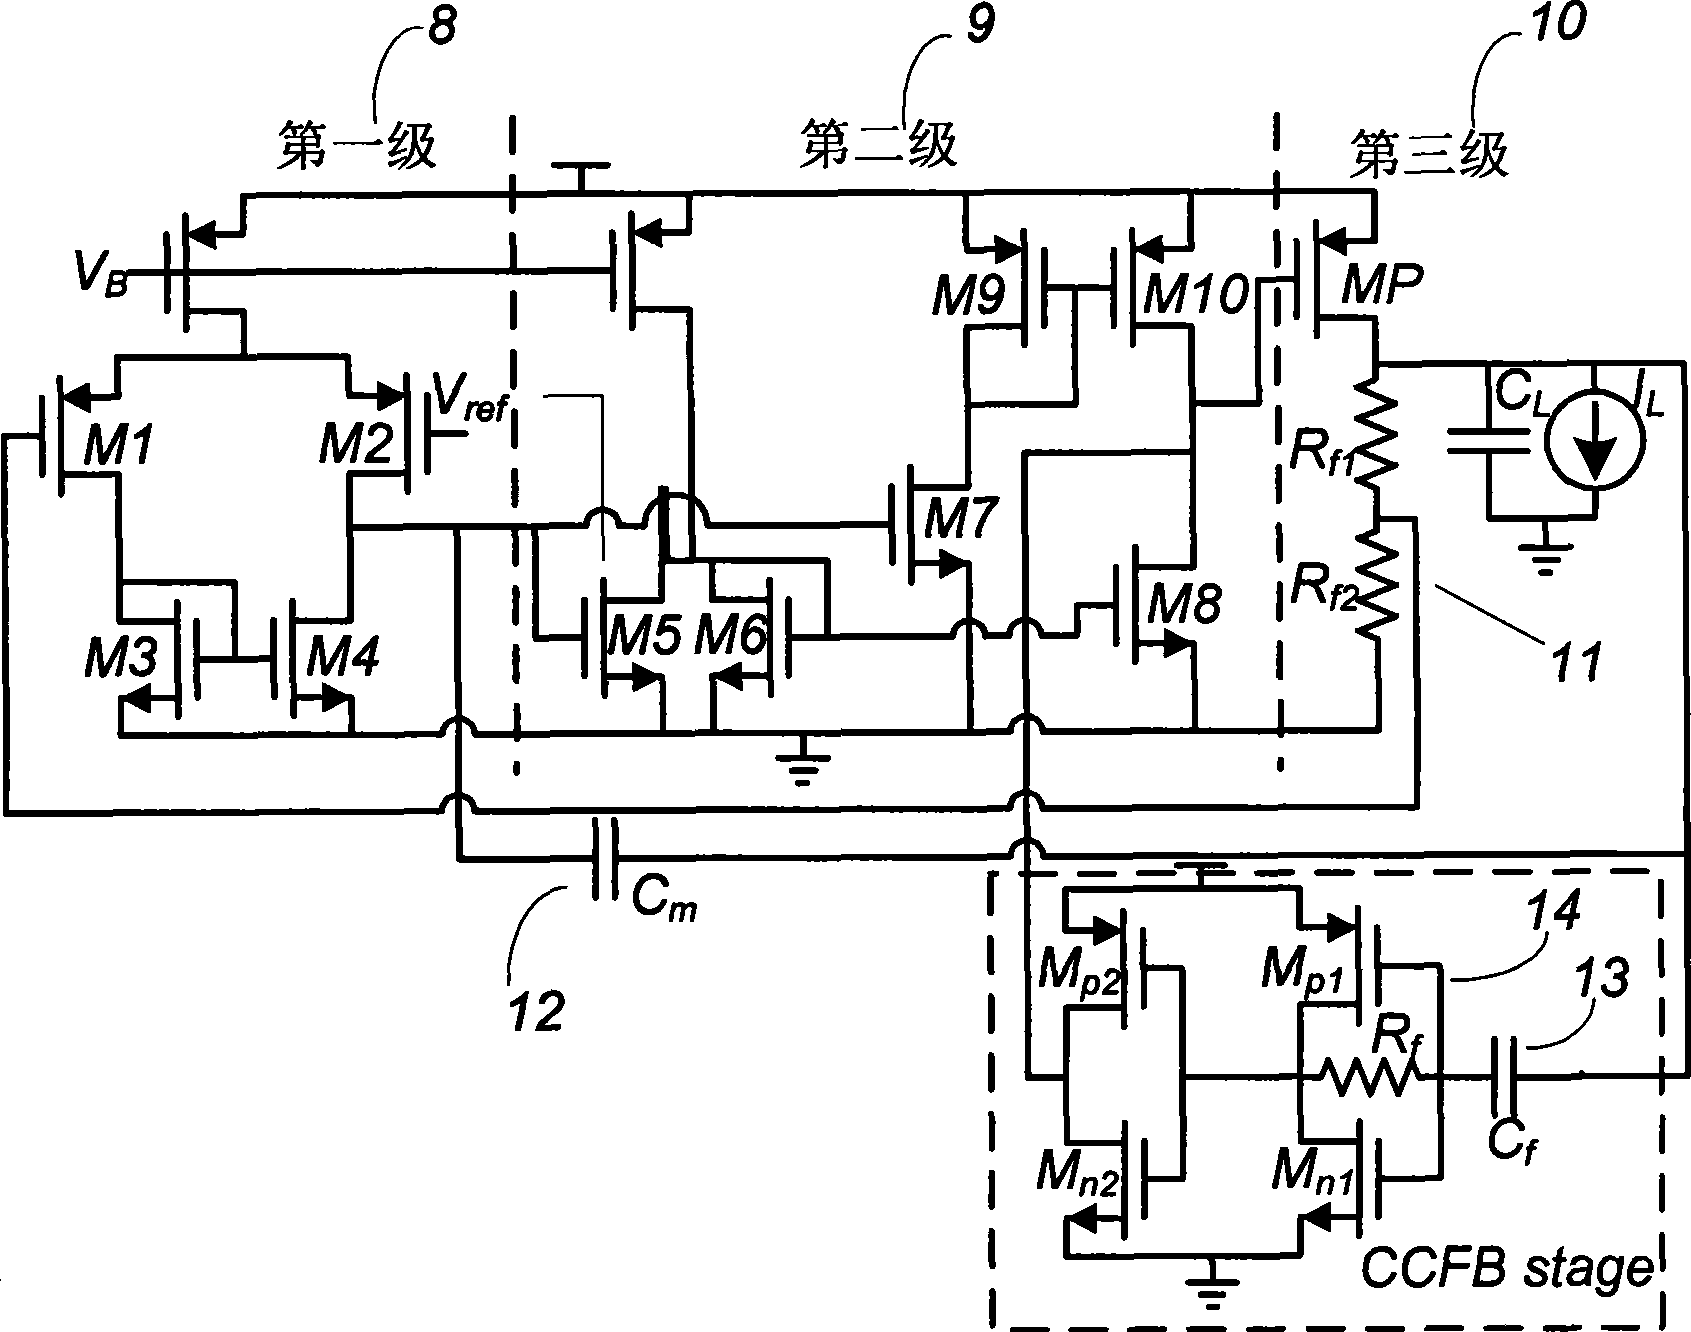 Low-voltage difference linear voltage stabilizer without off-chip compensation capacitor